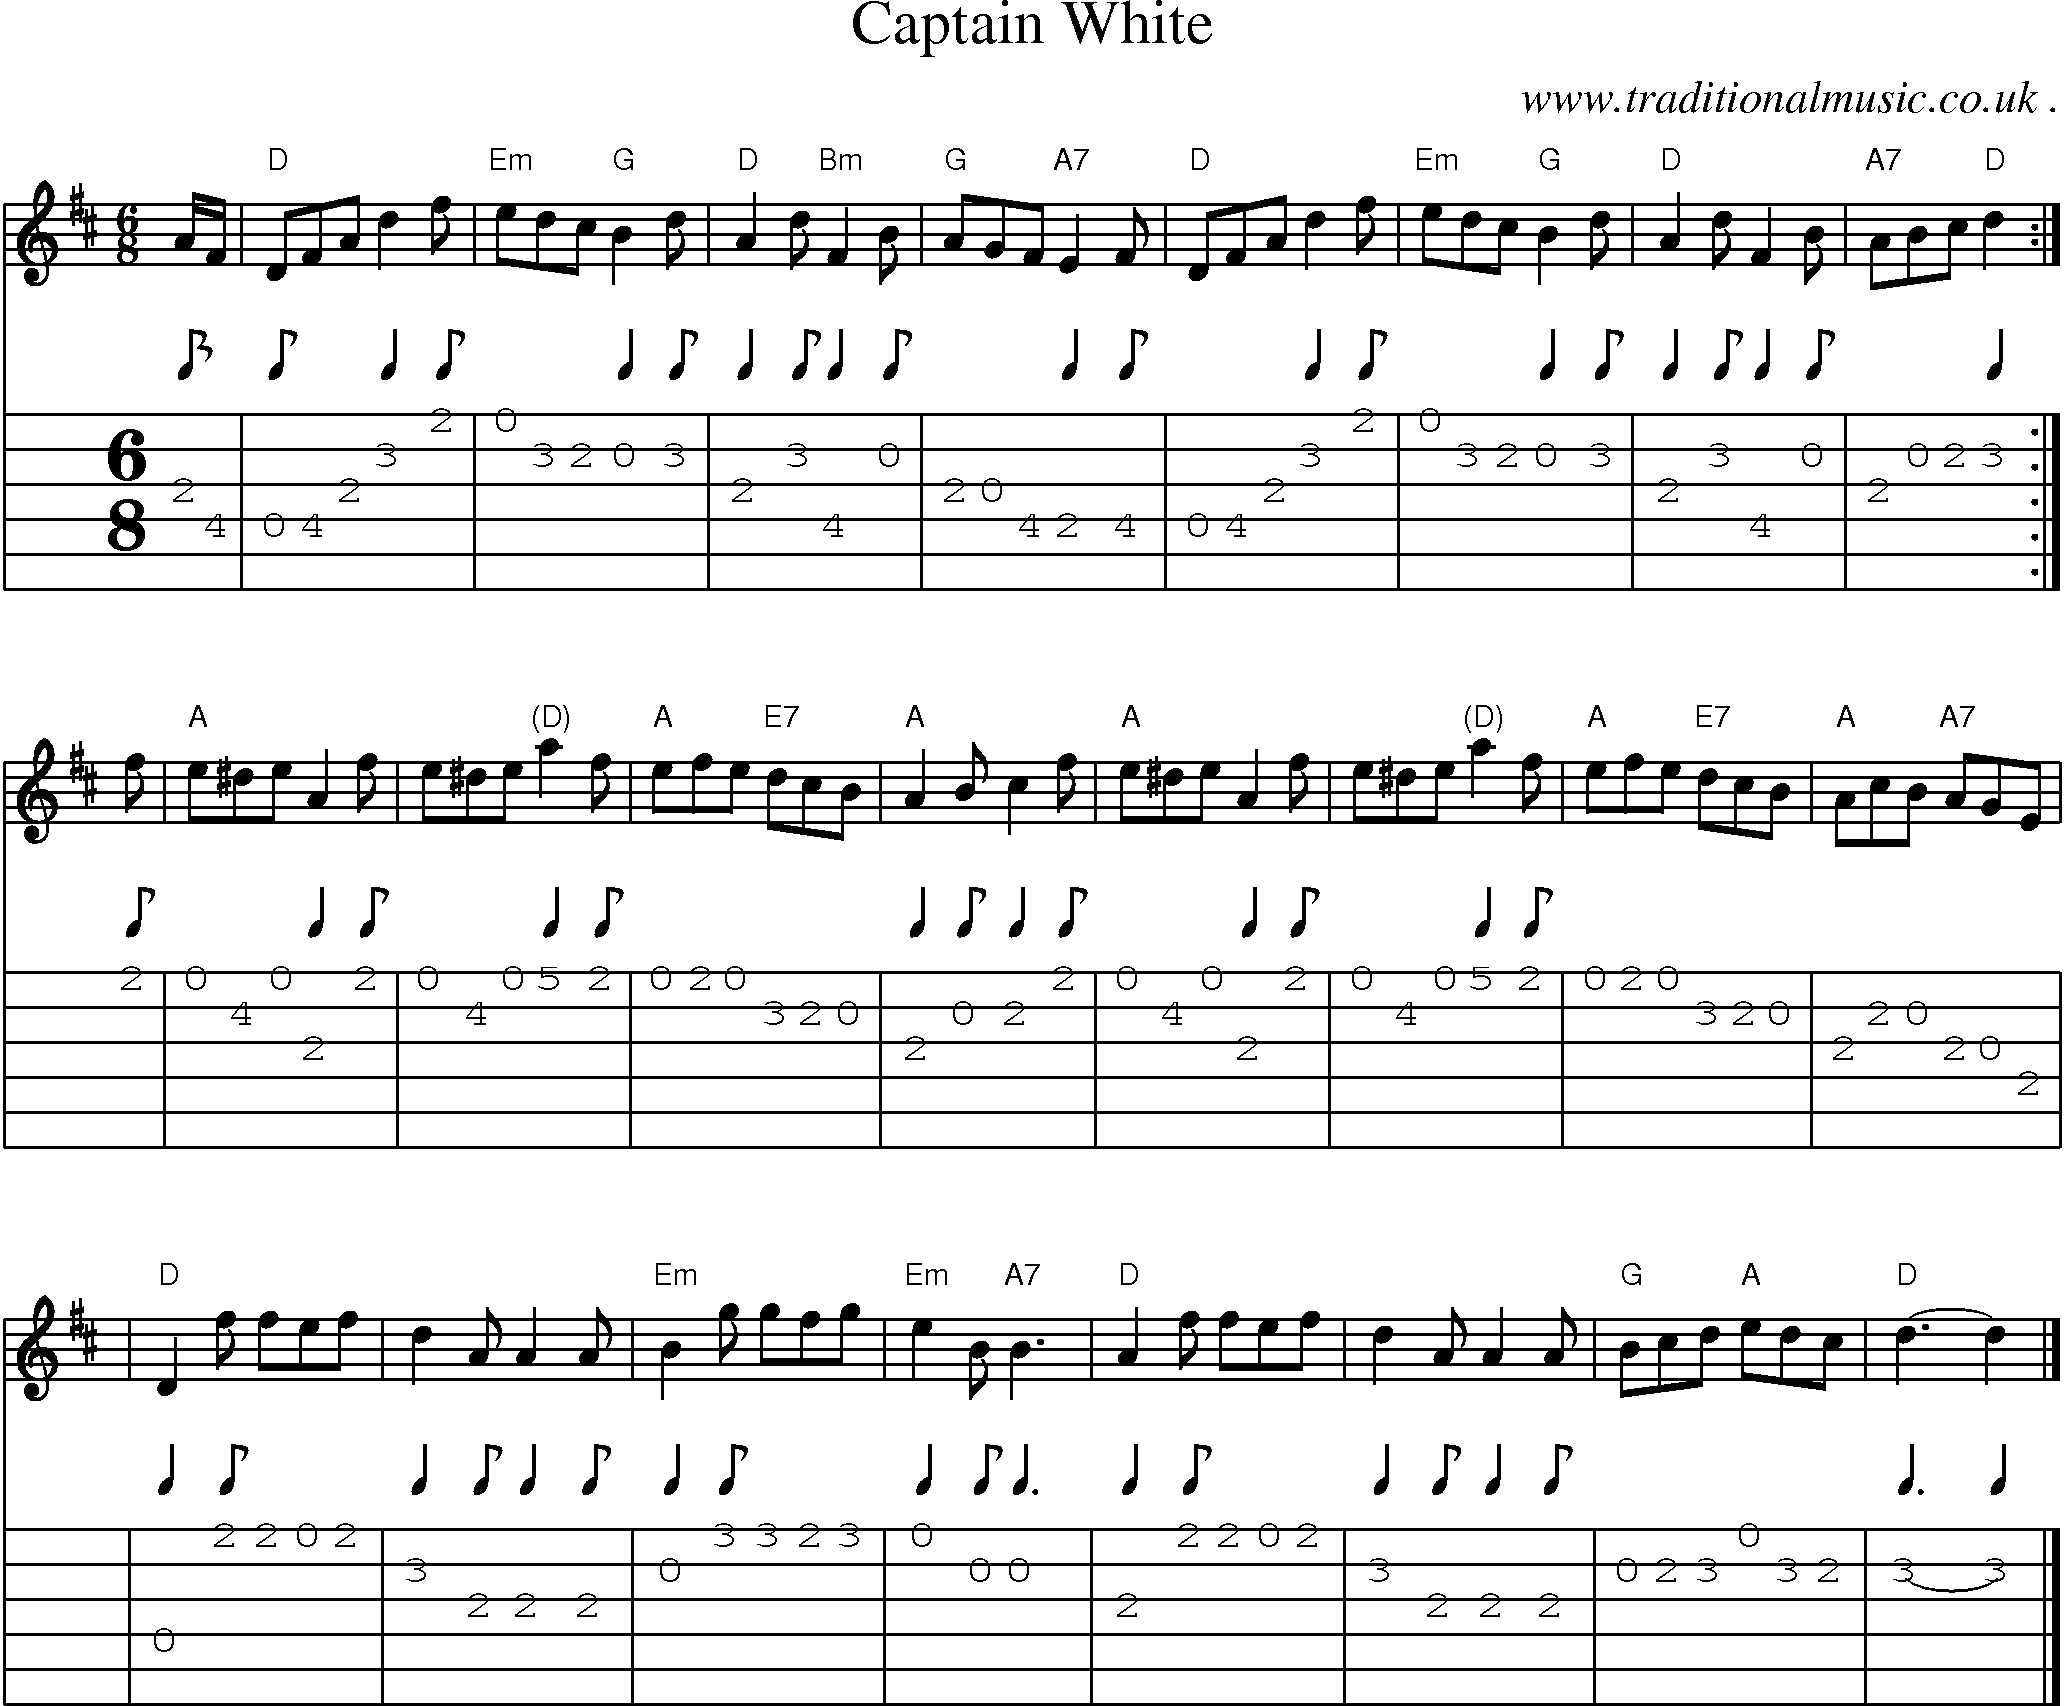 Sheet-music  score, Chords and Guitar Tabs for Captain White